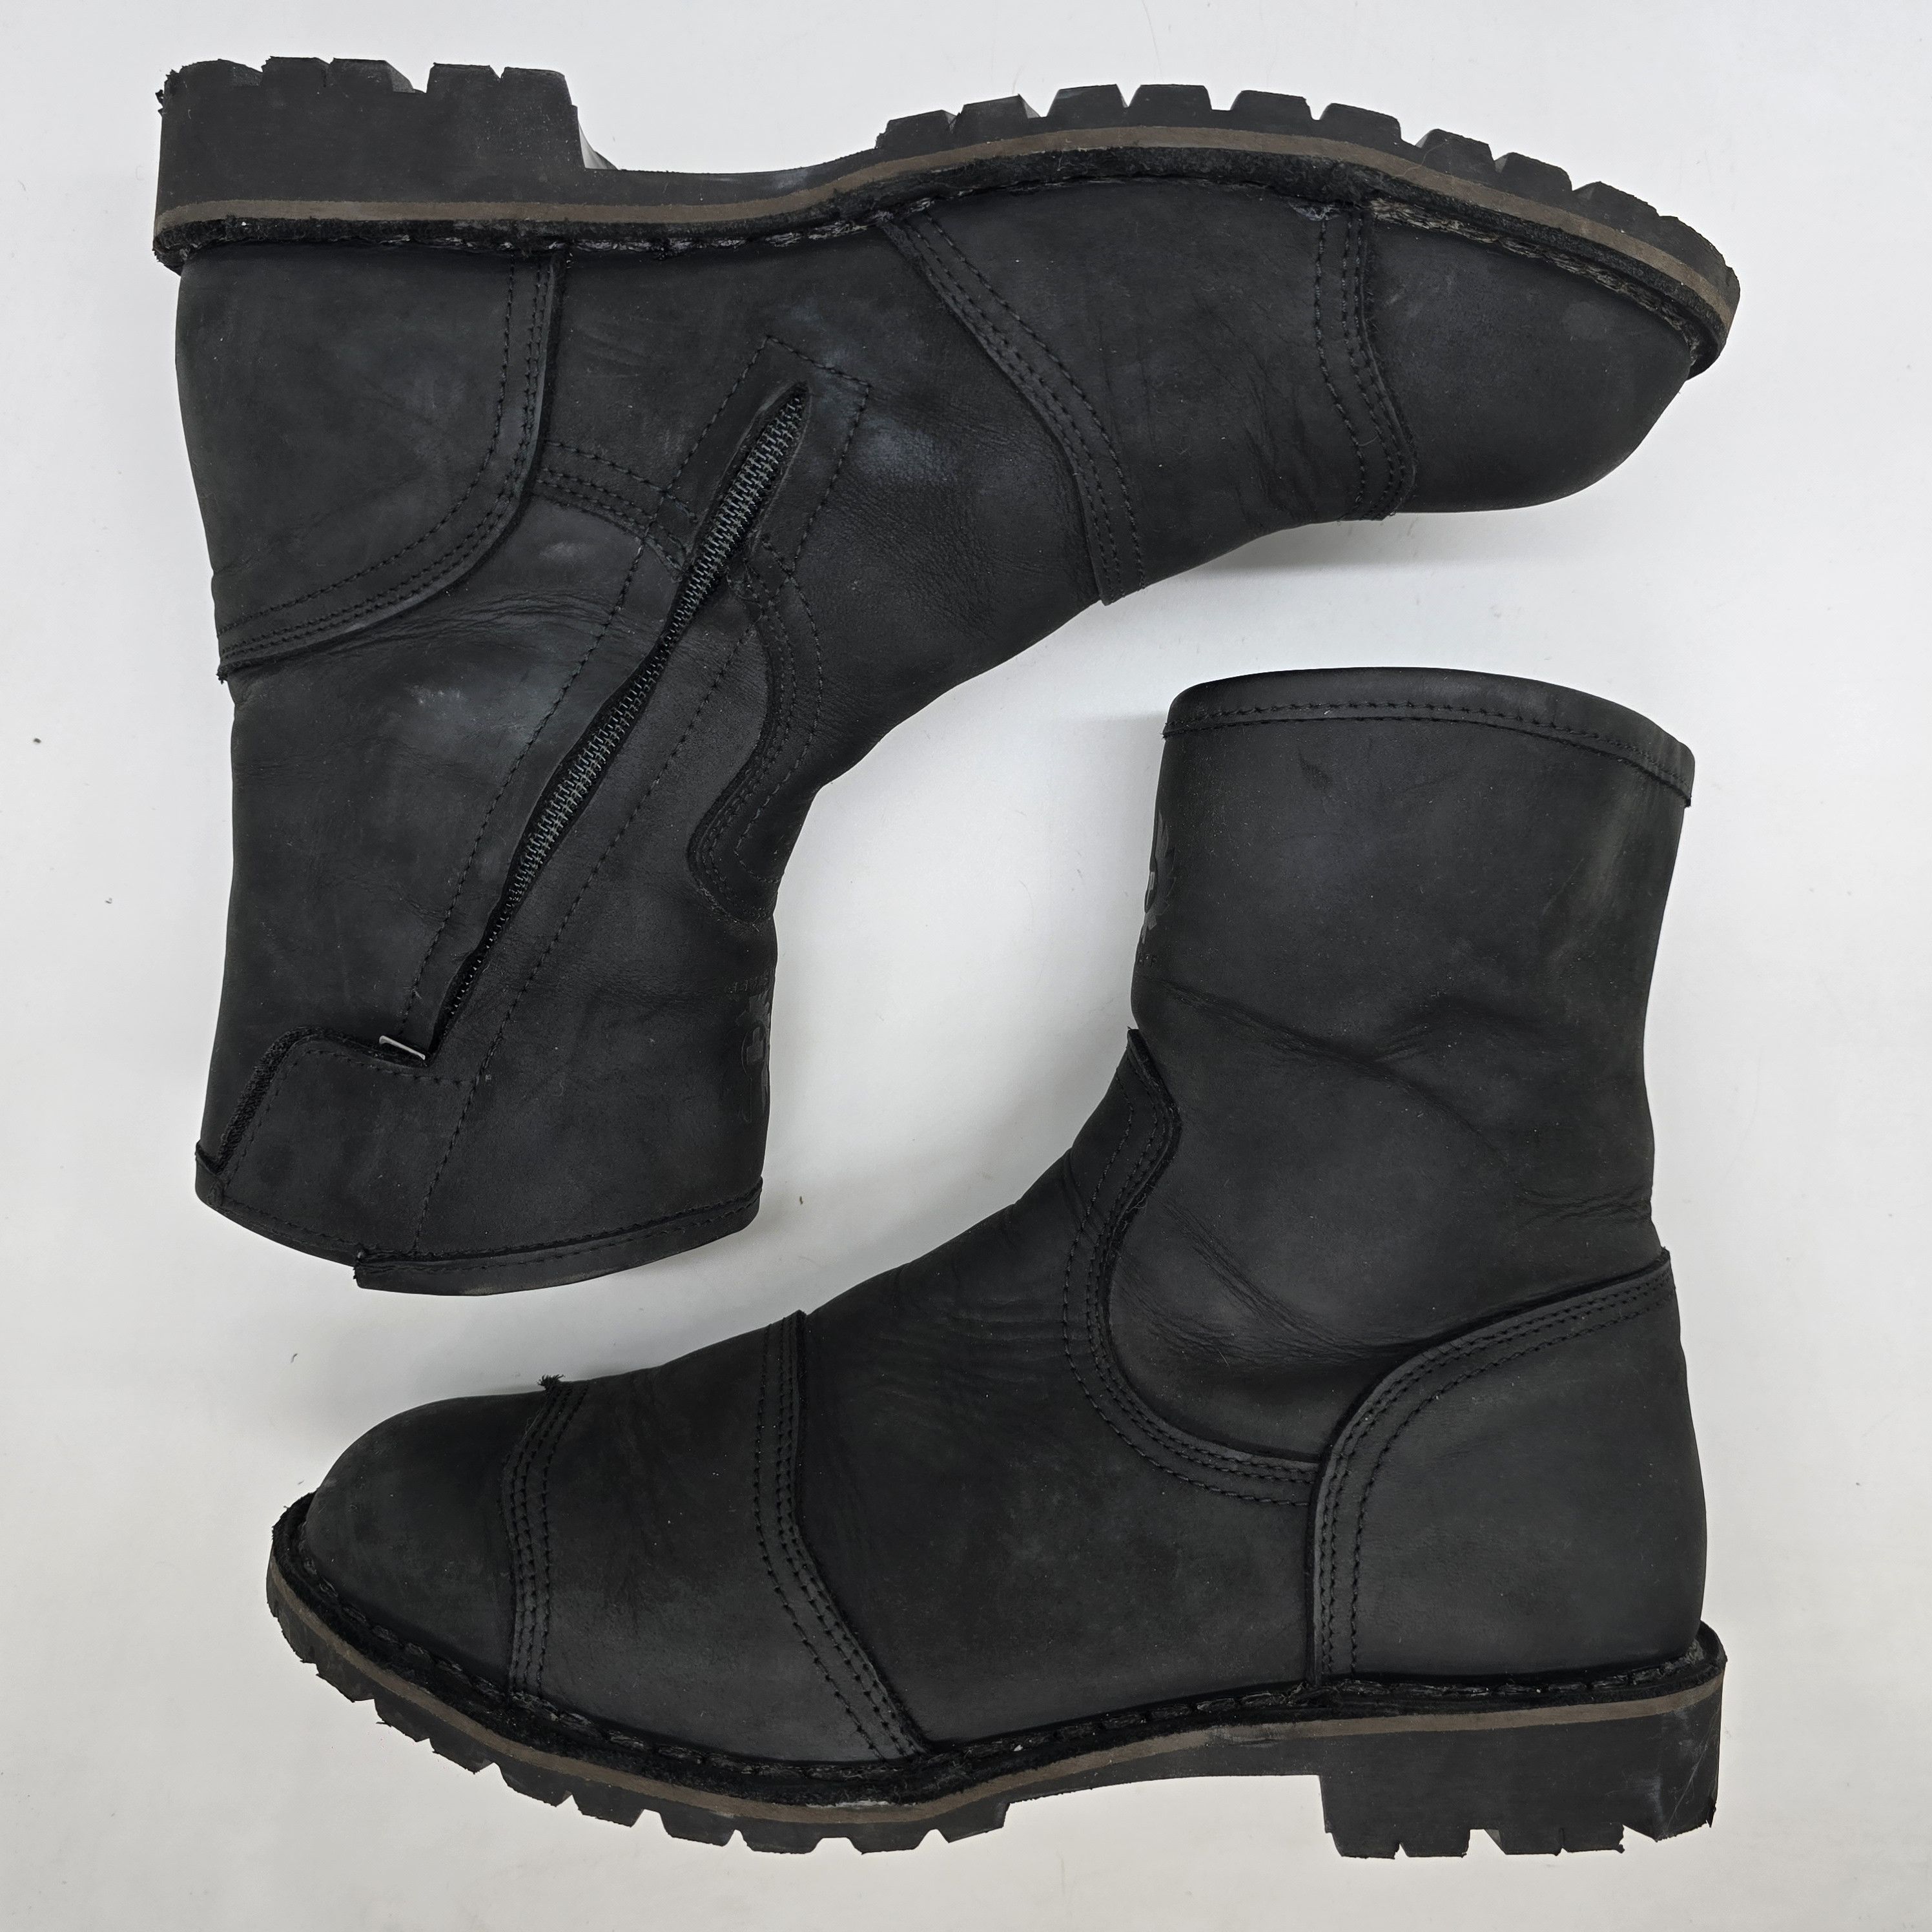 Belstaff - Duration Motorcycle Boots - 6